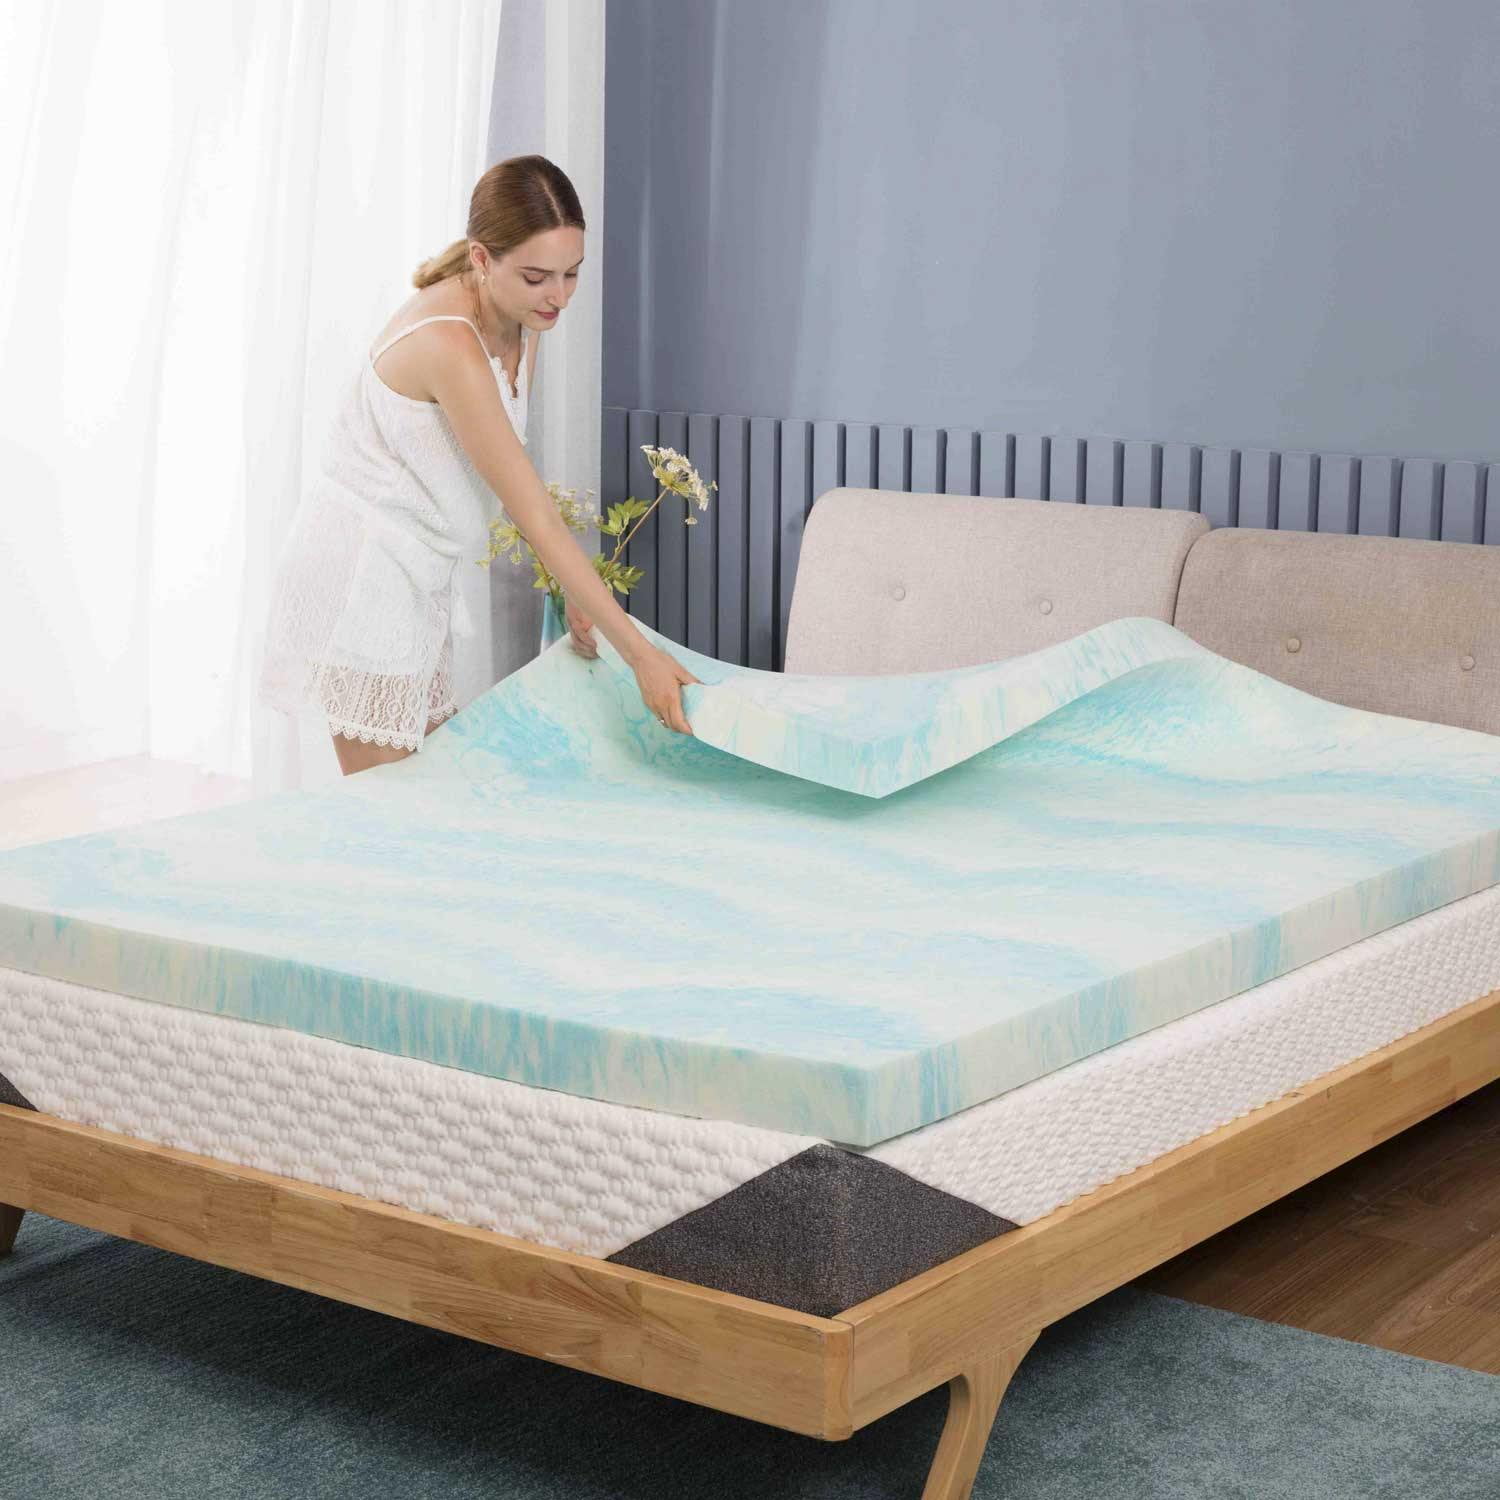 VALUXE 3 inch Gel Memory Foam Mattress Topper Twin Size High Density Cooling Pad Pressure Relief Bed Topper (with Removable & Washable Bamboo Cover)